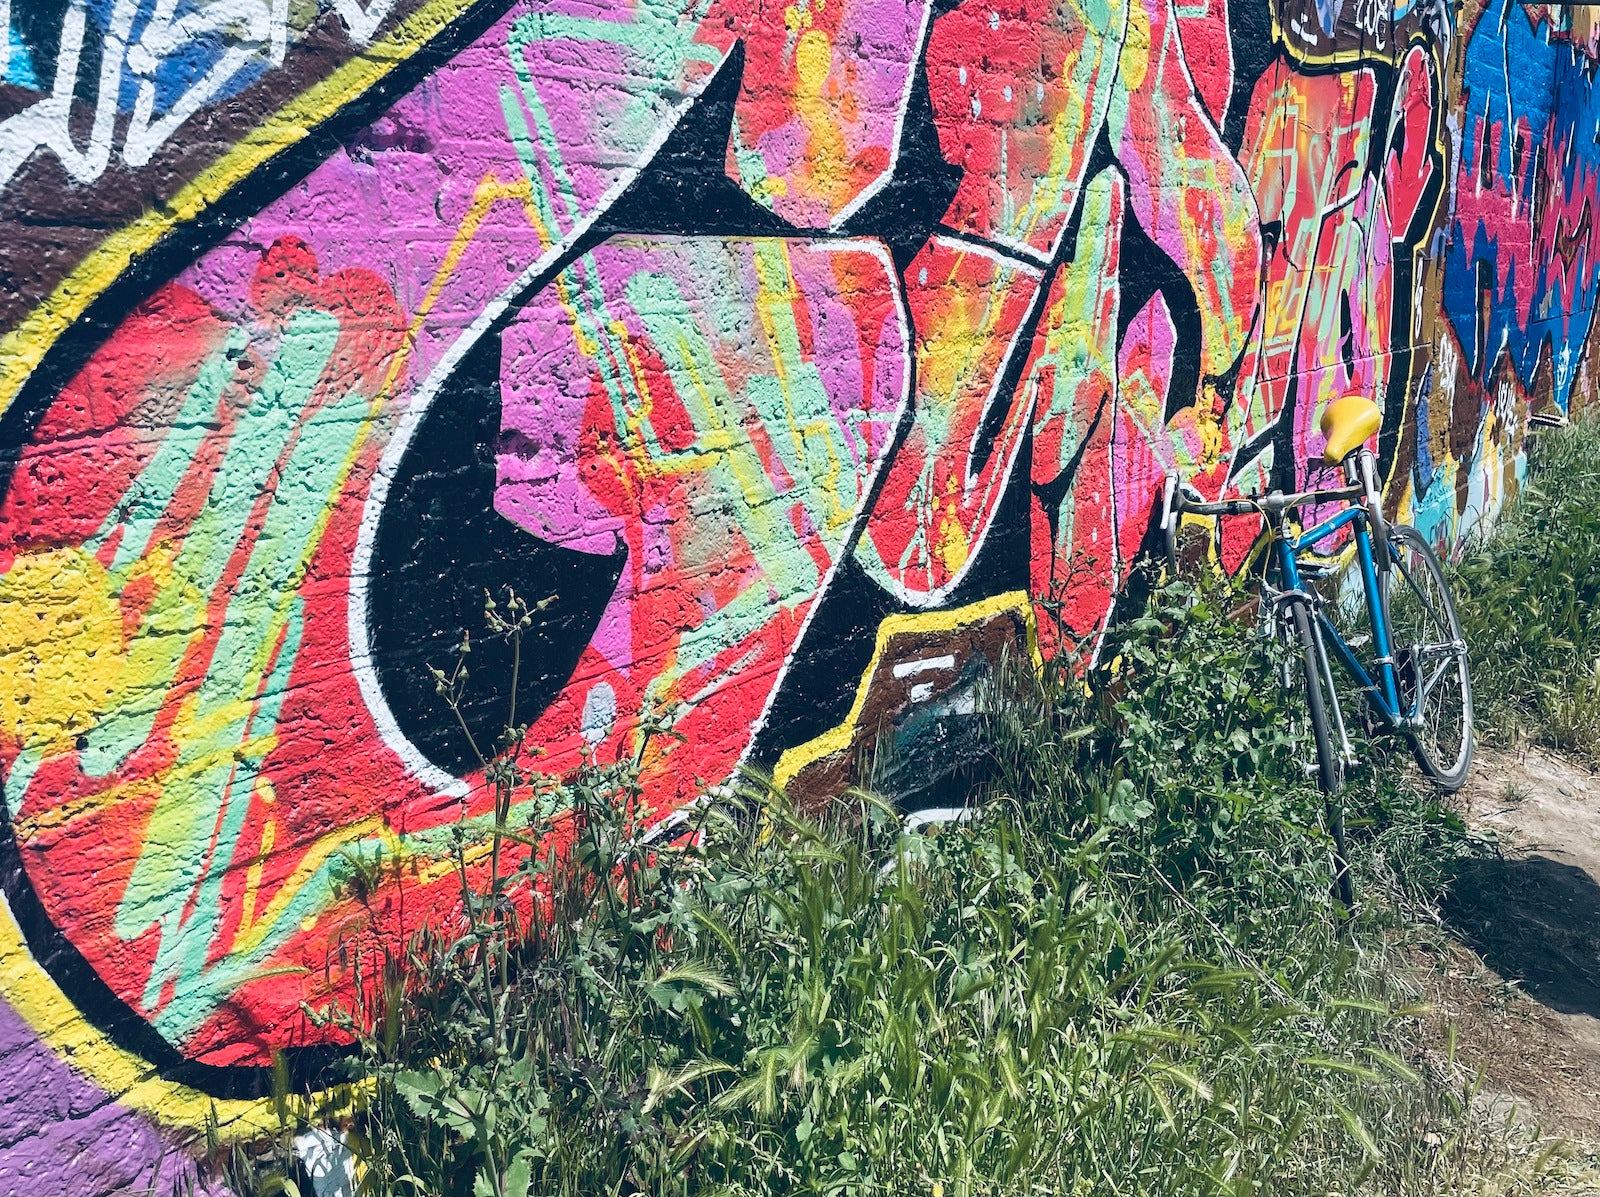 Regents canal in east London, graffiti wall and bike by us